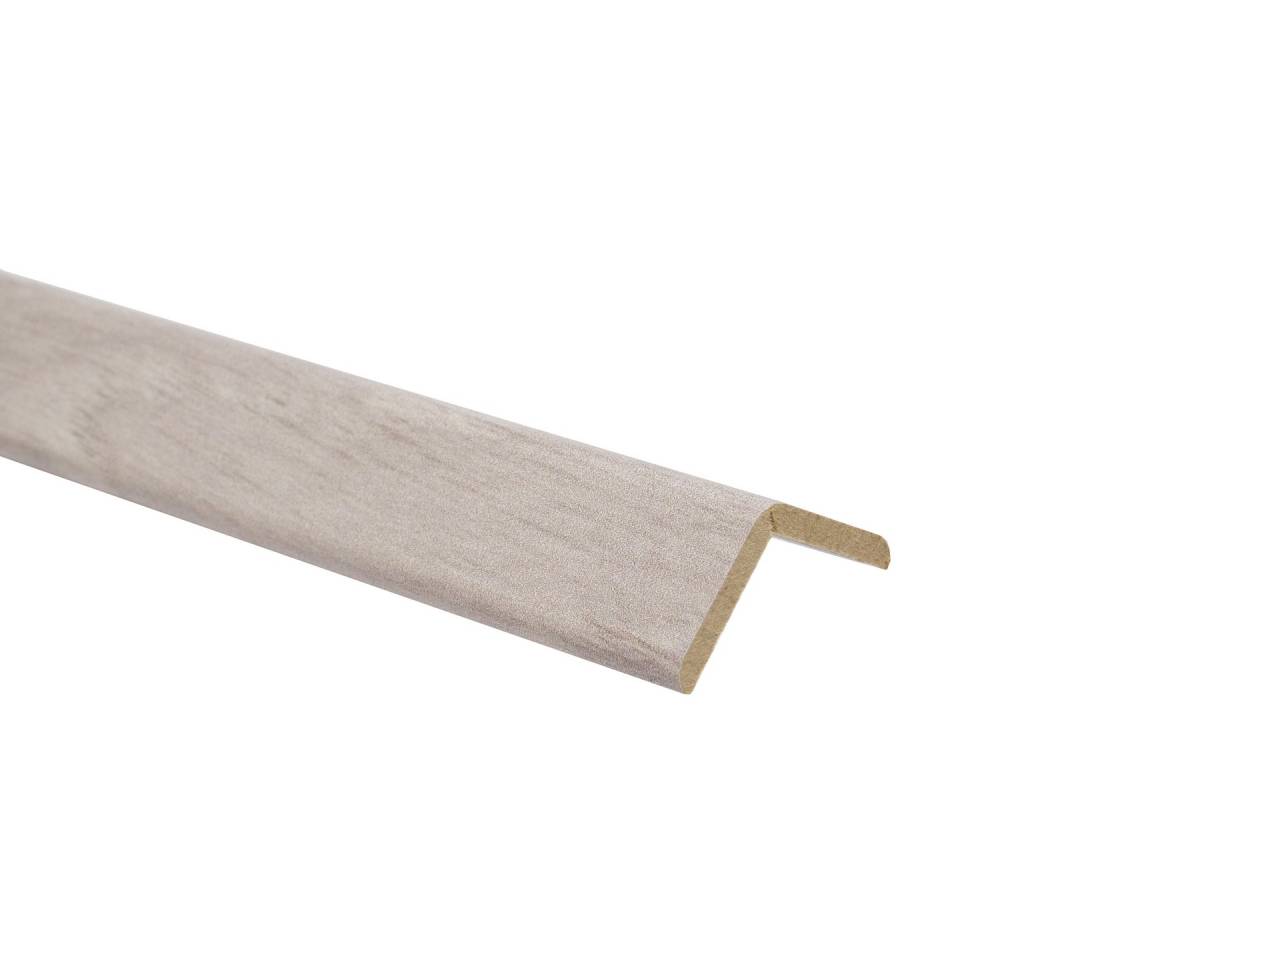 A slat with a breakaway angle at a different degree for an inside or outside angle. Thickness 3mm. Height 22 x 22 mm Length 2.6 m